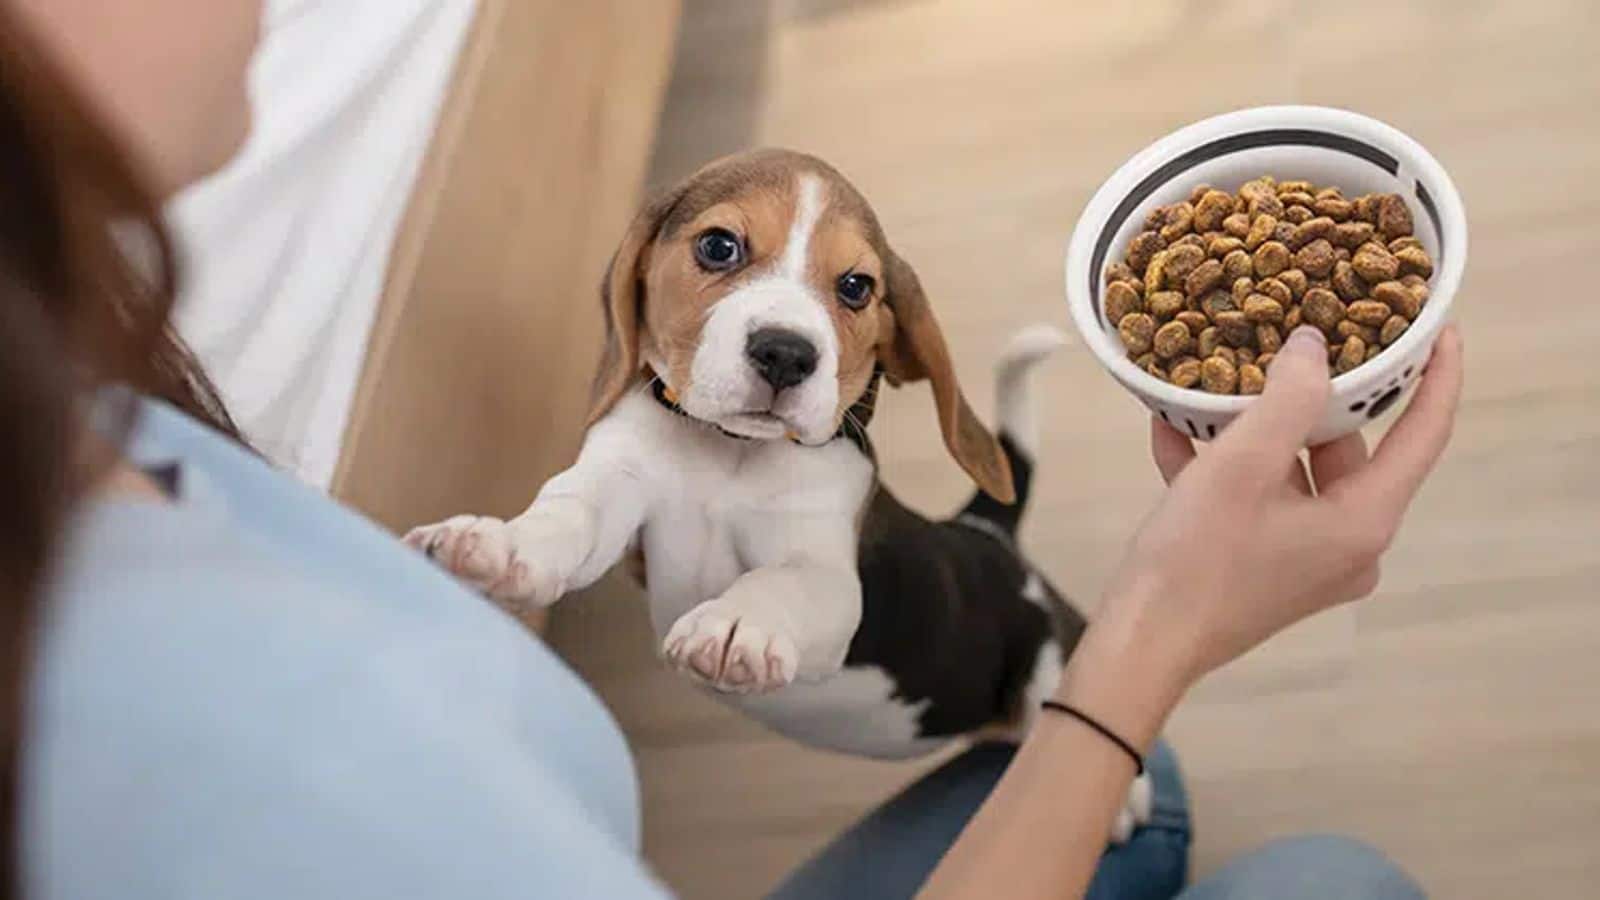 Diet tips for the good health of your Beagle